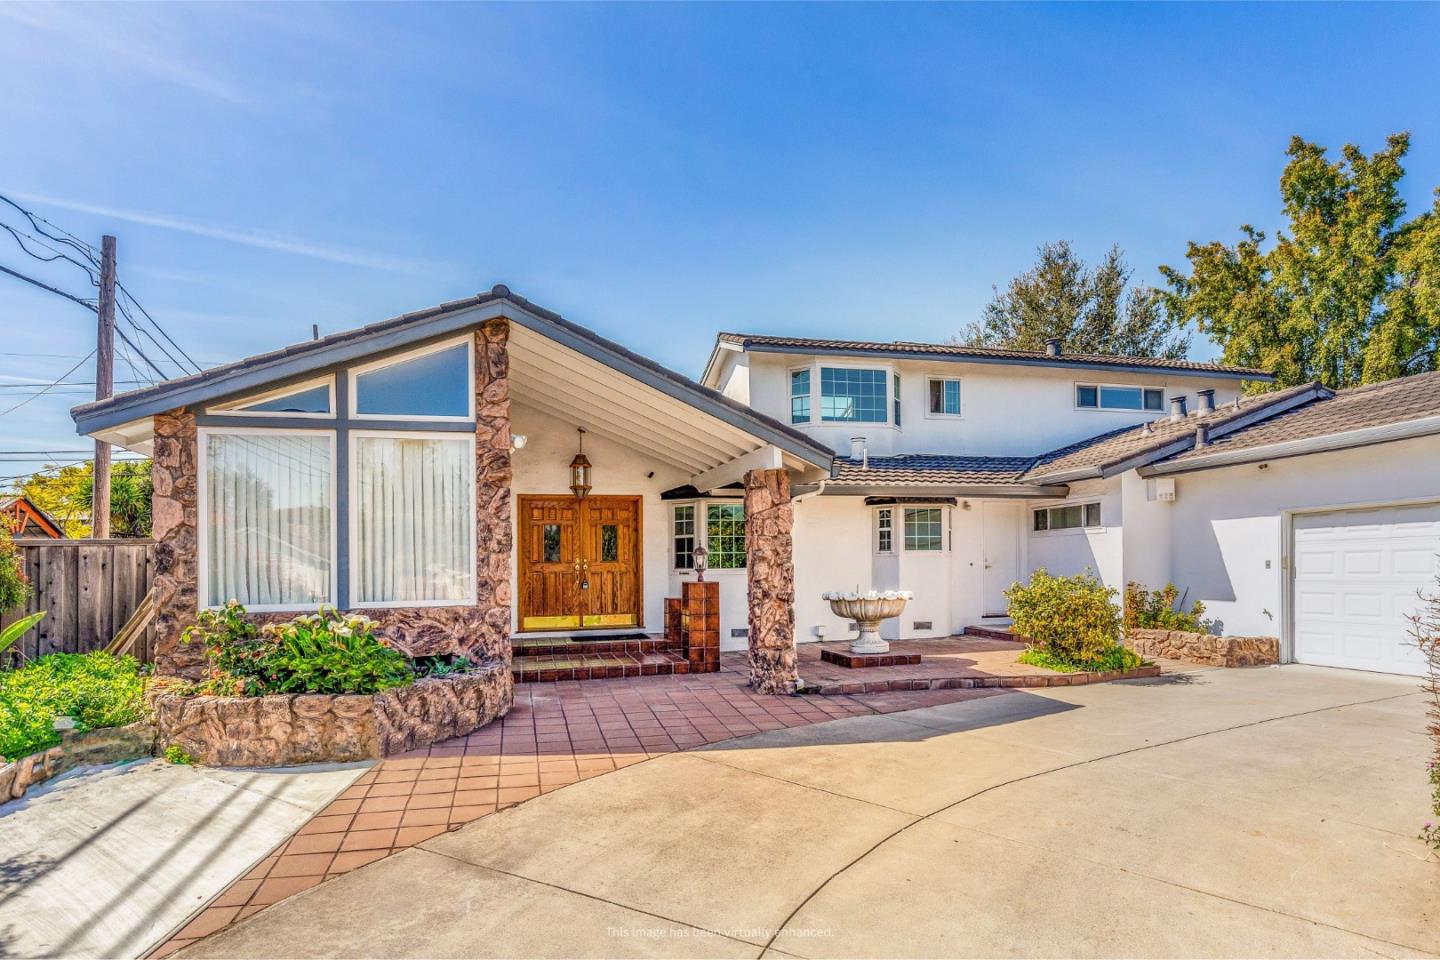 Photo of 12147 Woodside Dr in Saratoga, CA